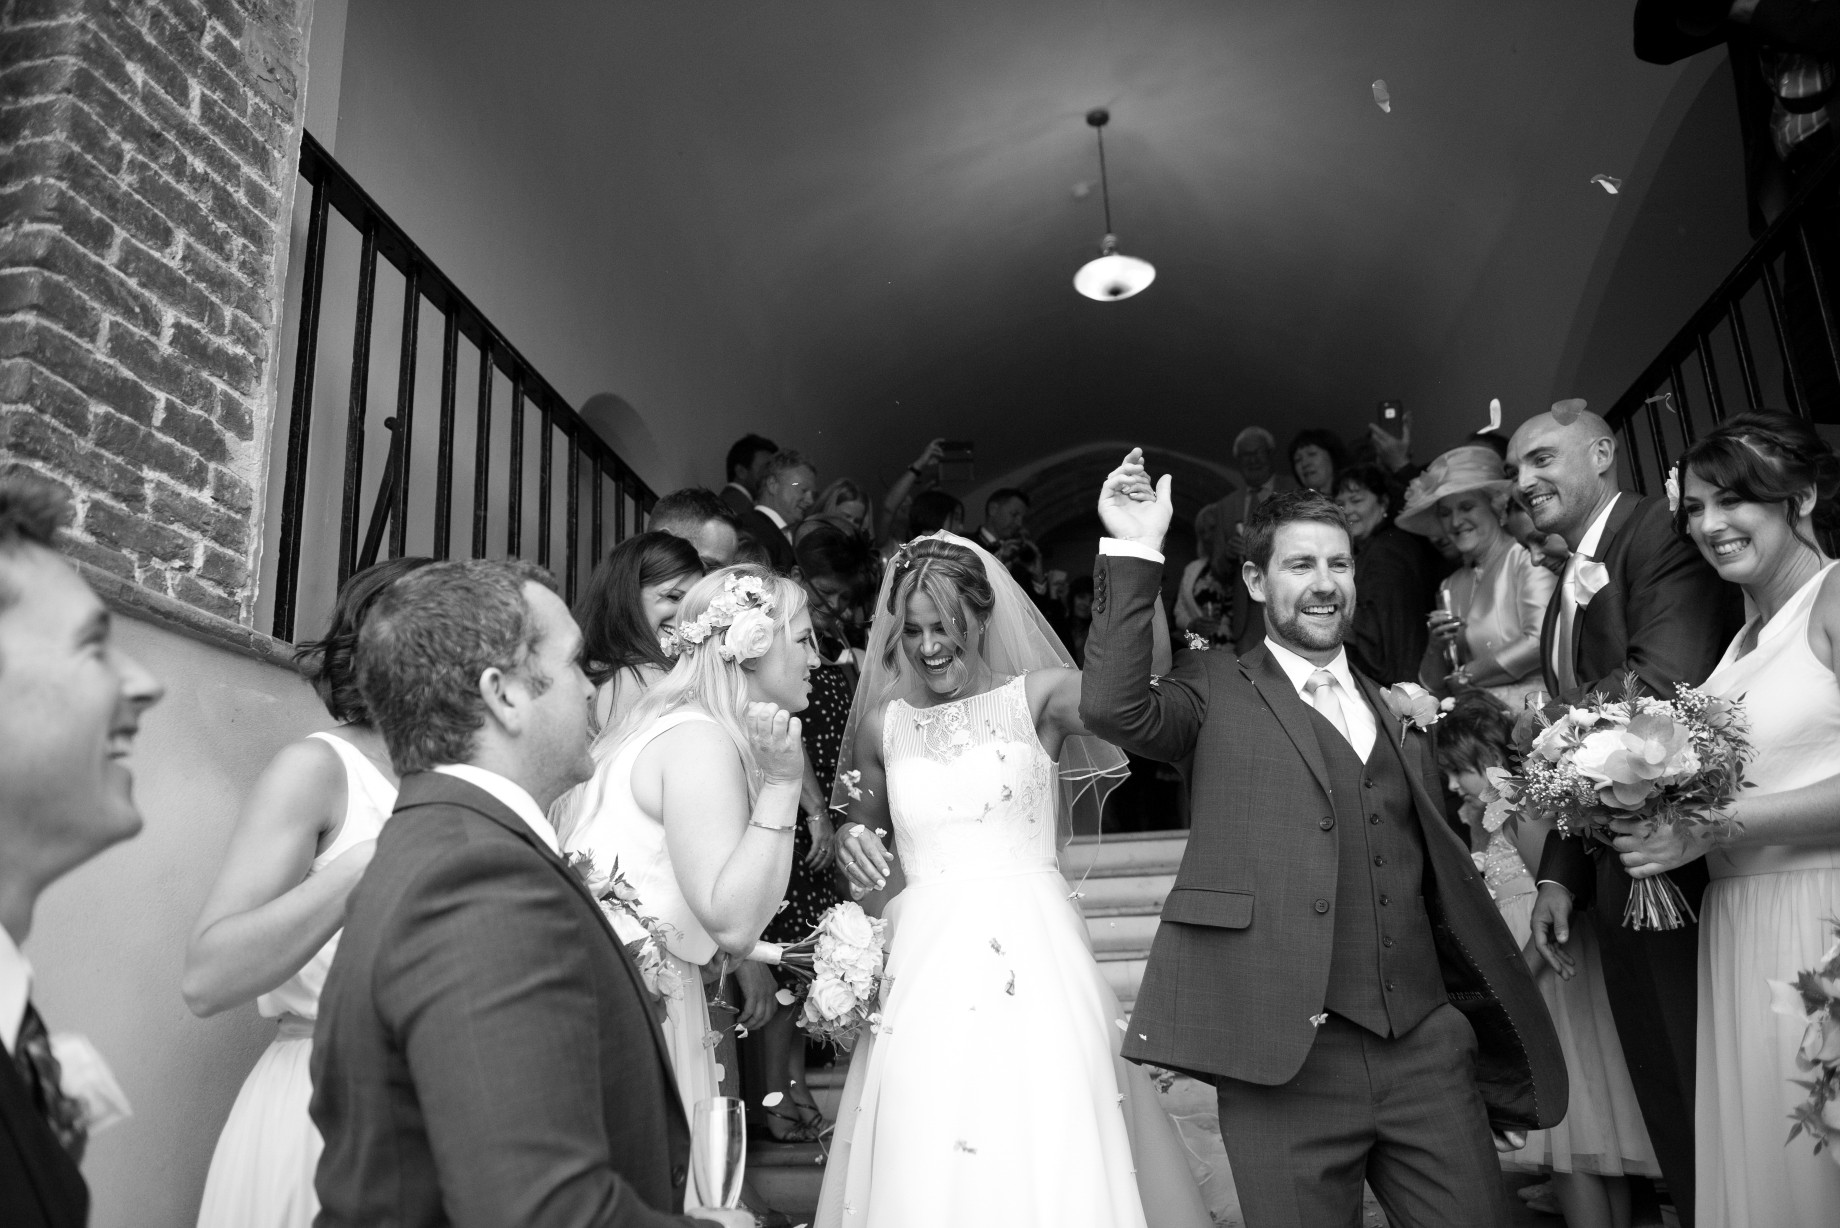 Wedding photography at Farnham Castle in Surrey - just married